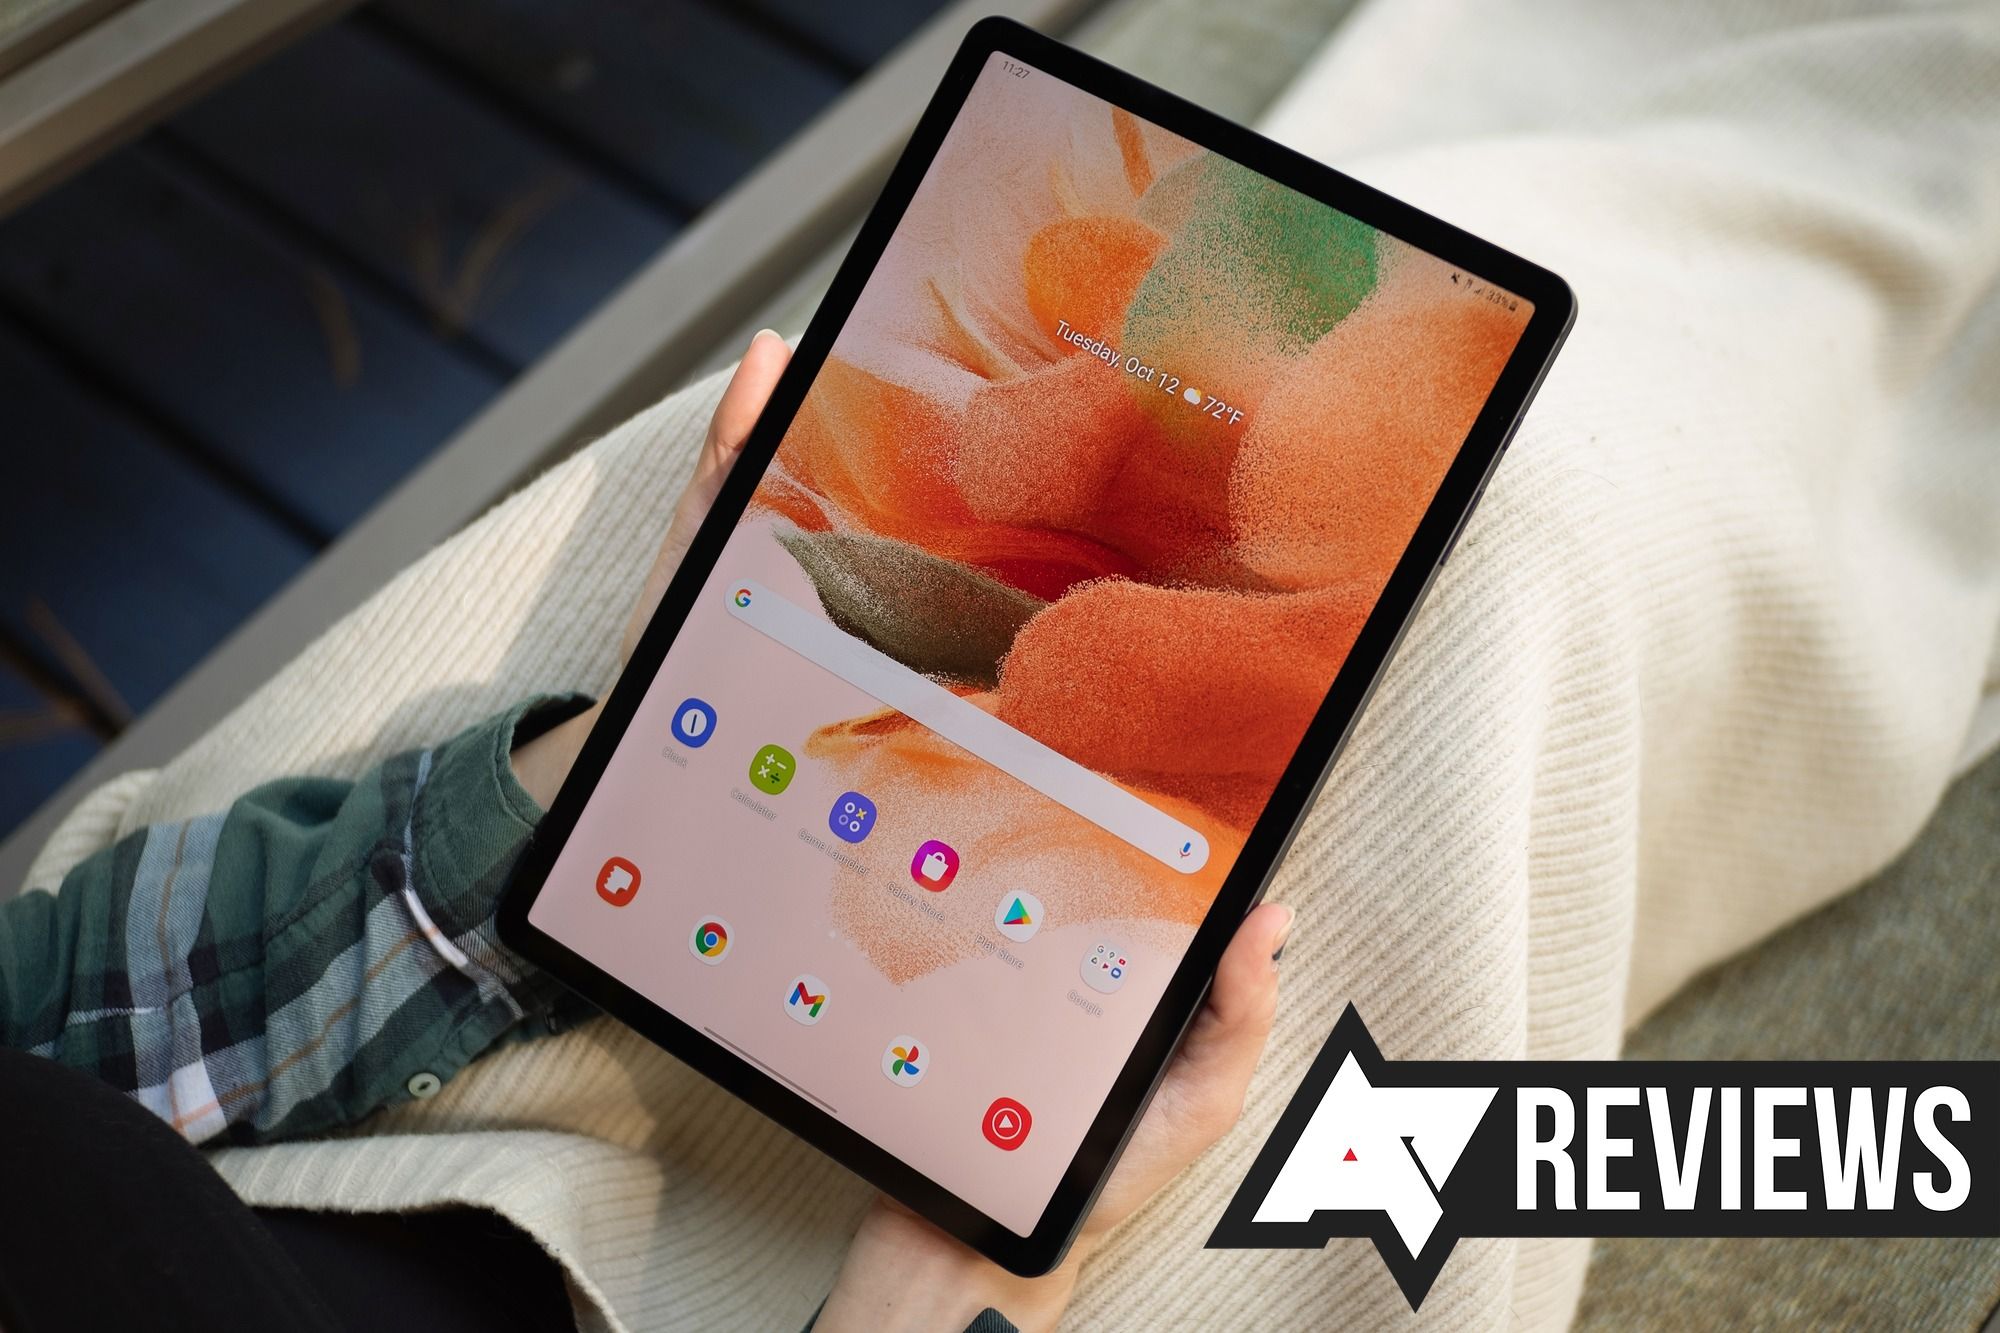 Samsung Galaxy Tab S7 FE review: Decent at a discount